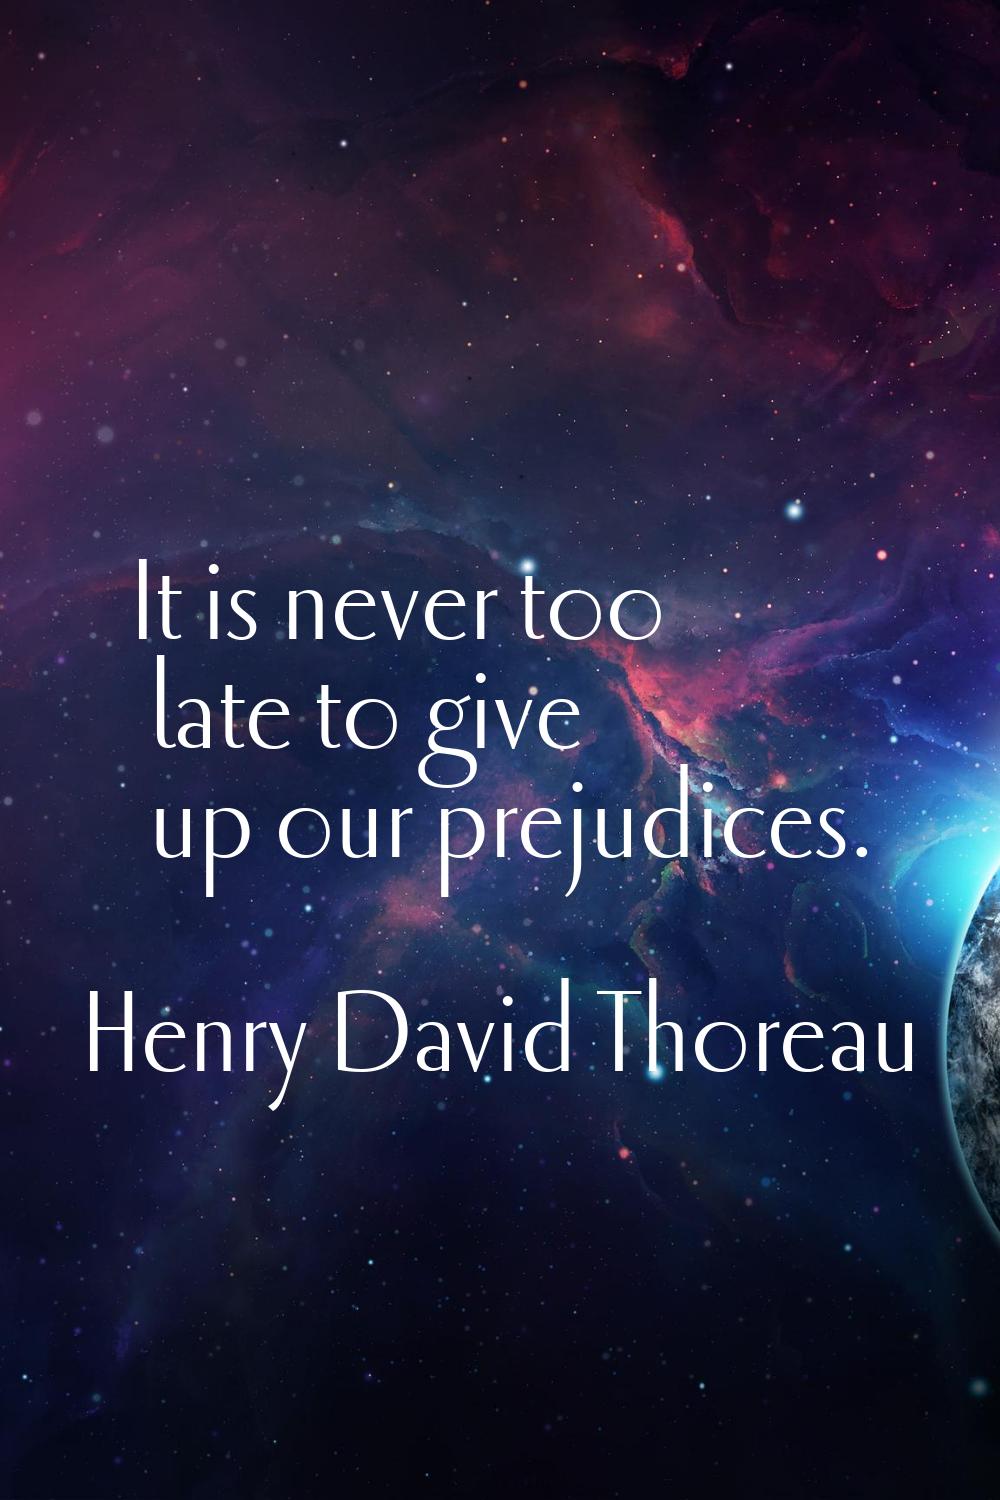 It is never too late to give up our prejudices.